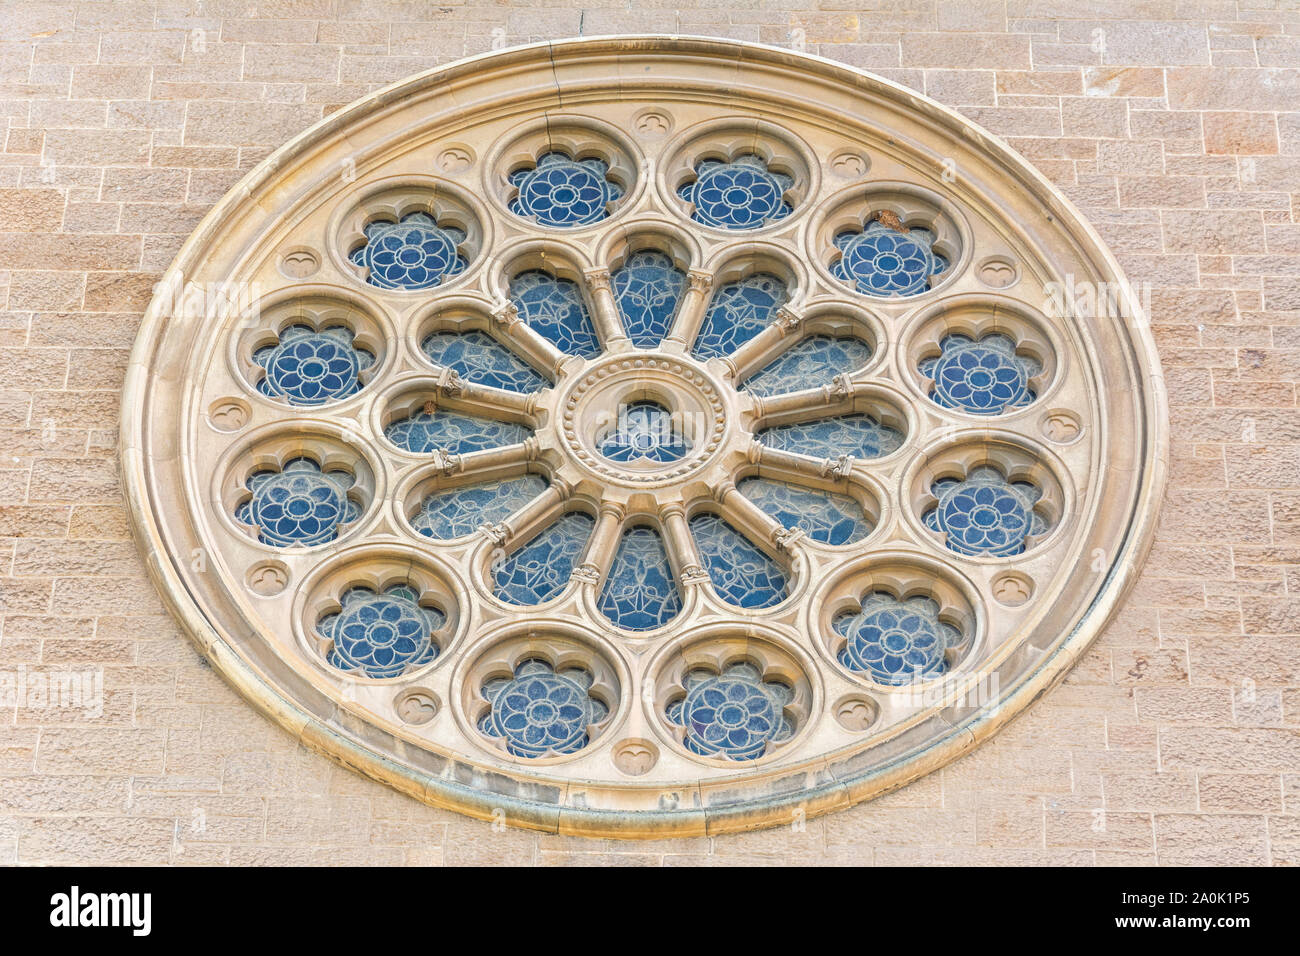 Adelaide, Australia - March 16, 2017. Exterior of rose window of St Peter’s Cathedral in Adelaide. Stock Photo